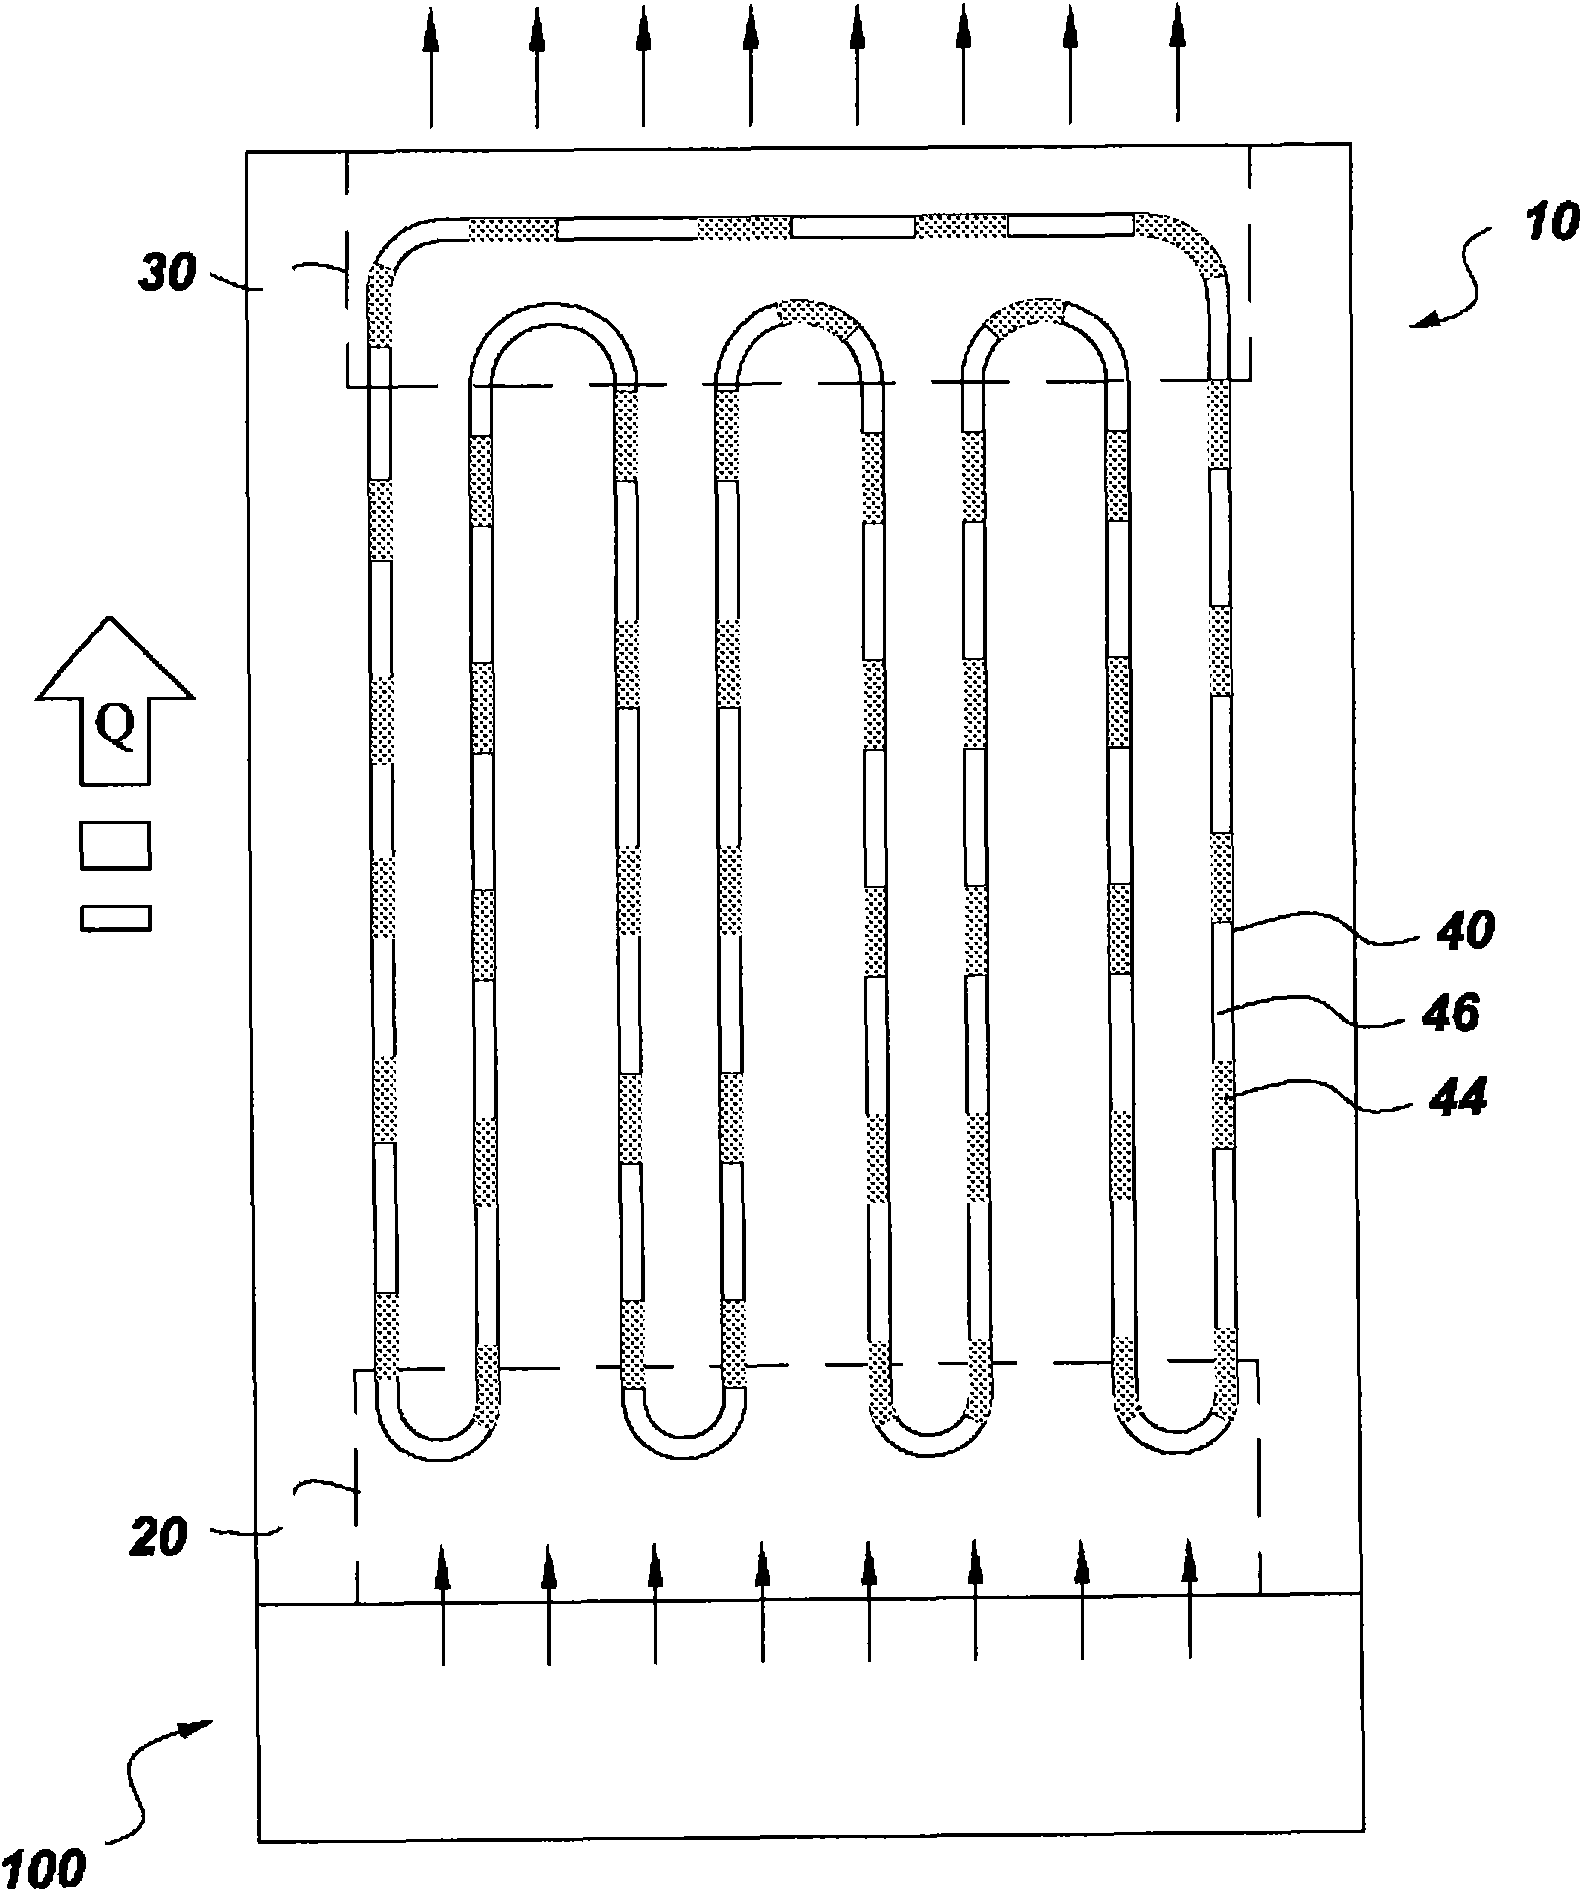 Apparatus and method of superconducting magnet cooling